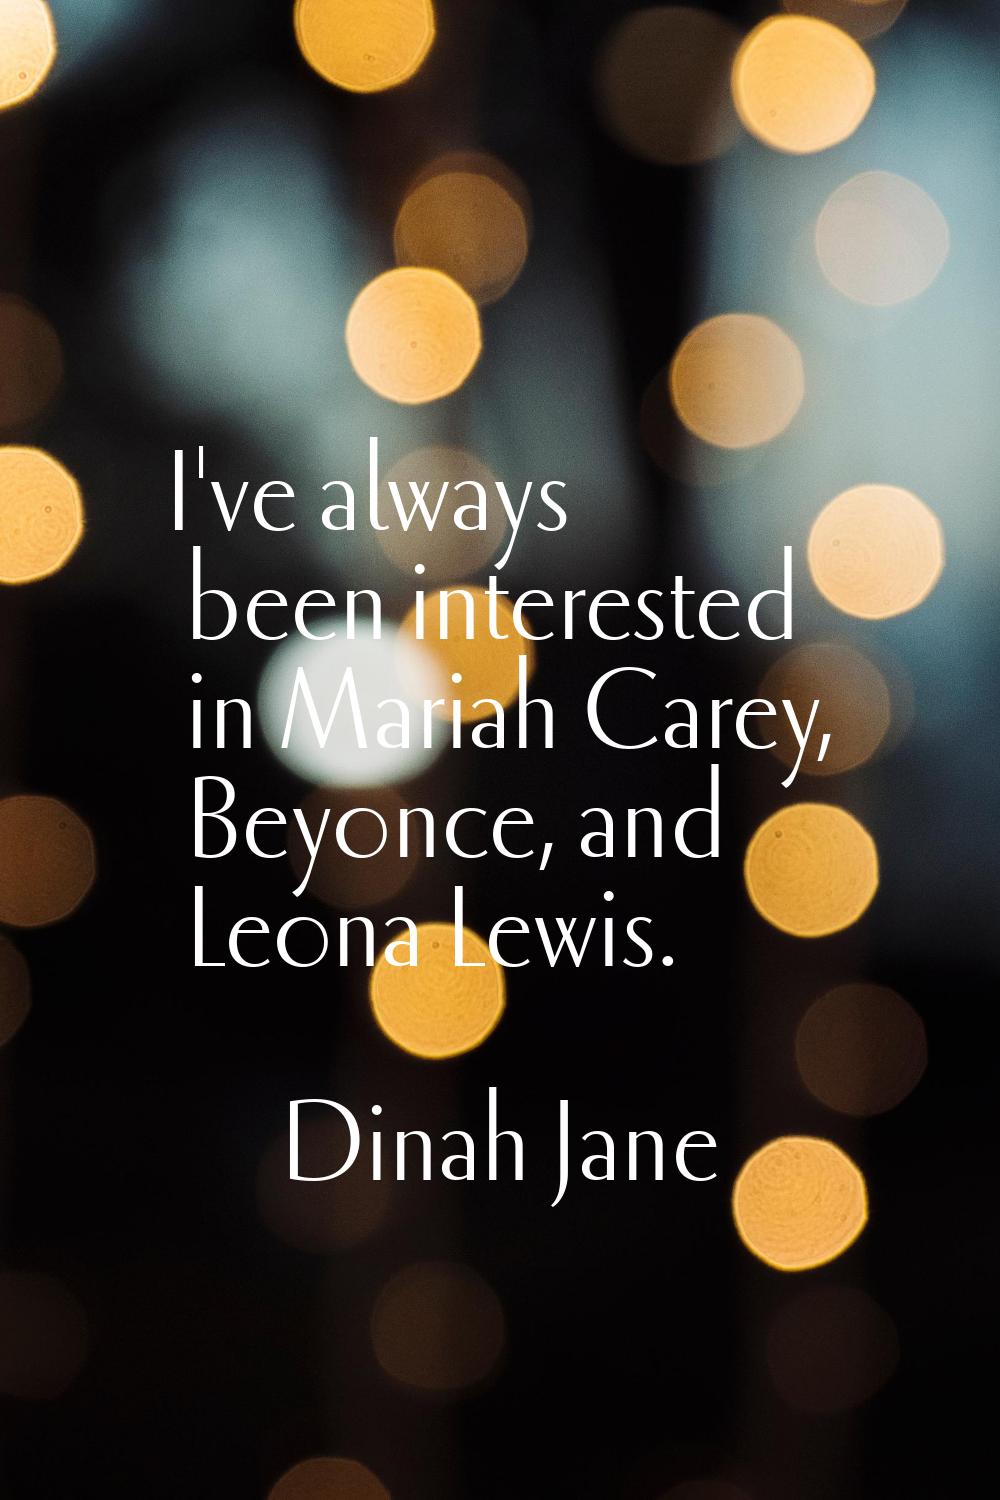 I've always been interested in Mariah Carey, Beyonce, and Leona Lewis.